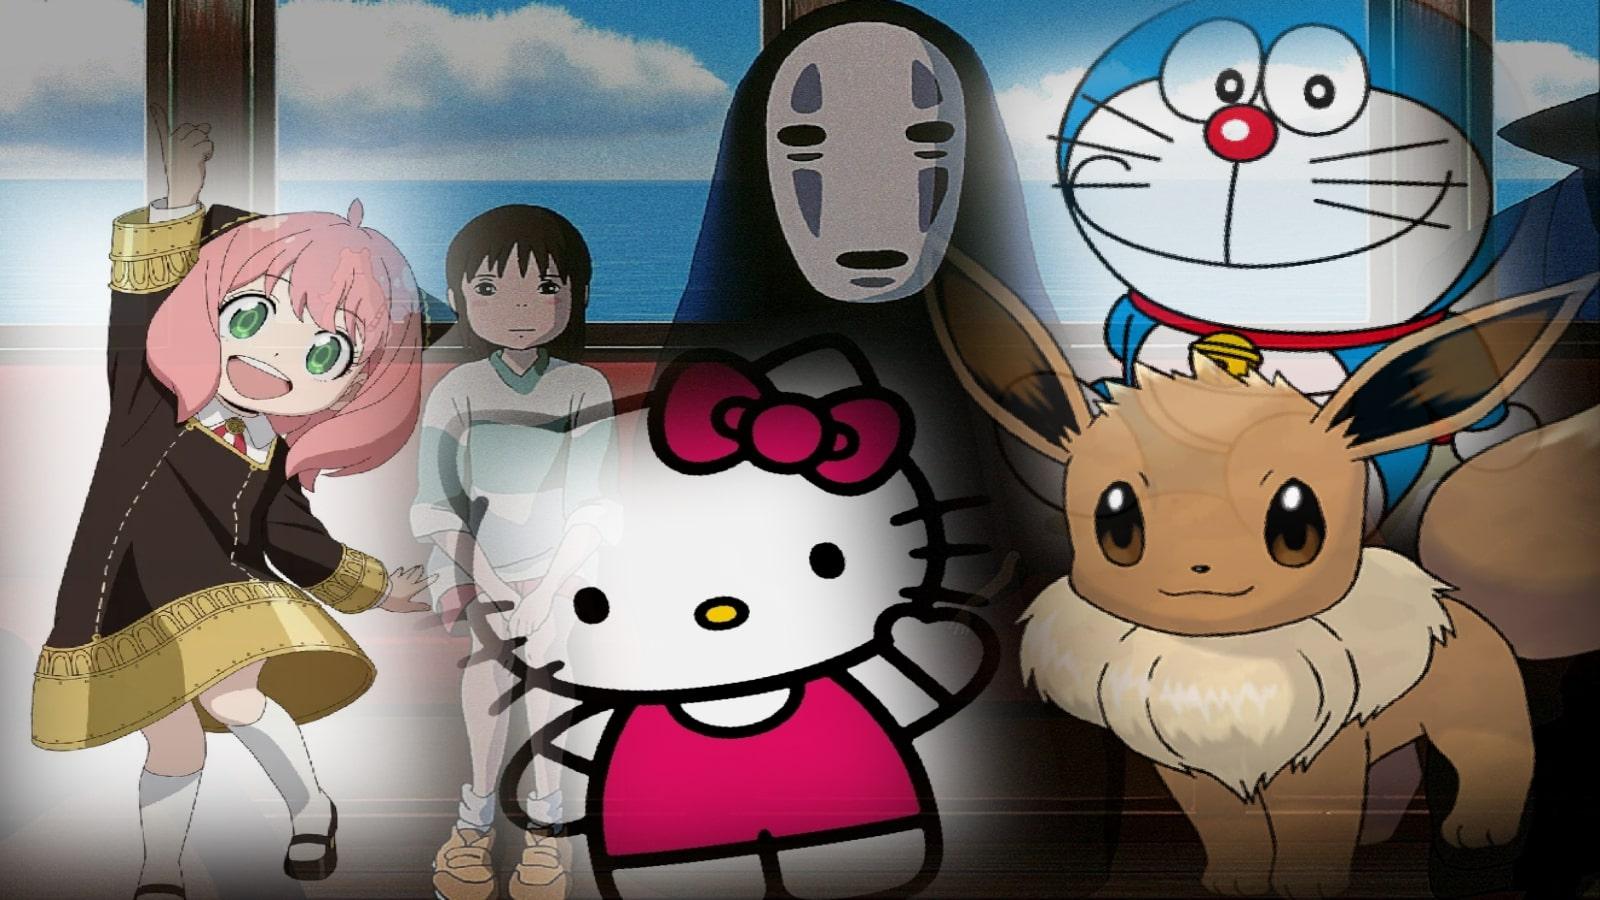 15 Hello Kitty-Themed Attractions Around the World